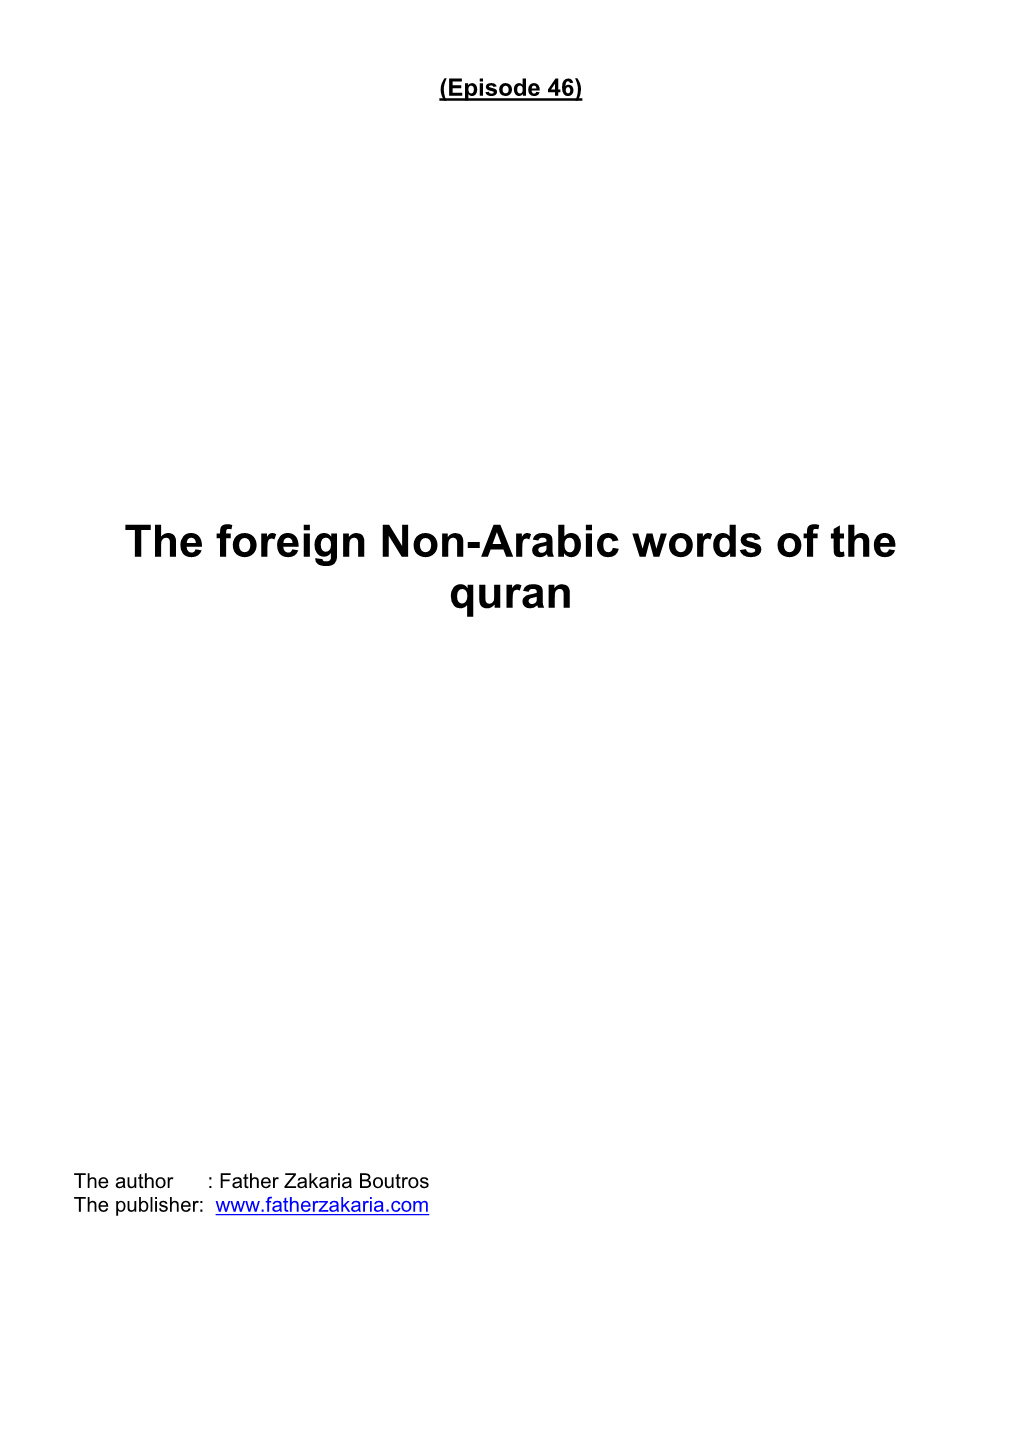 The Foreign Non-Arabic Words of the Quran